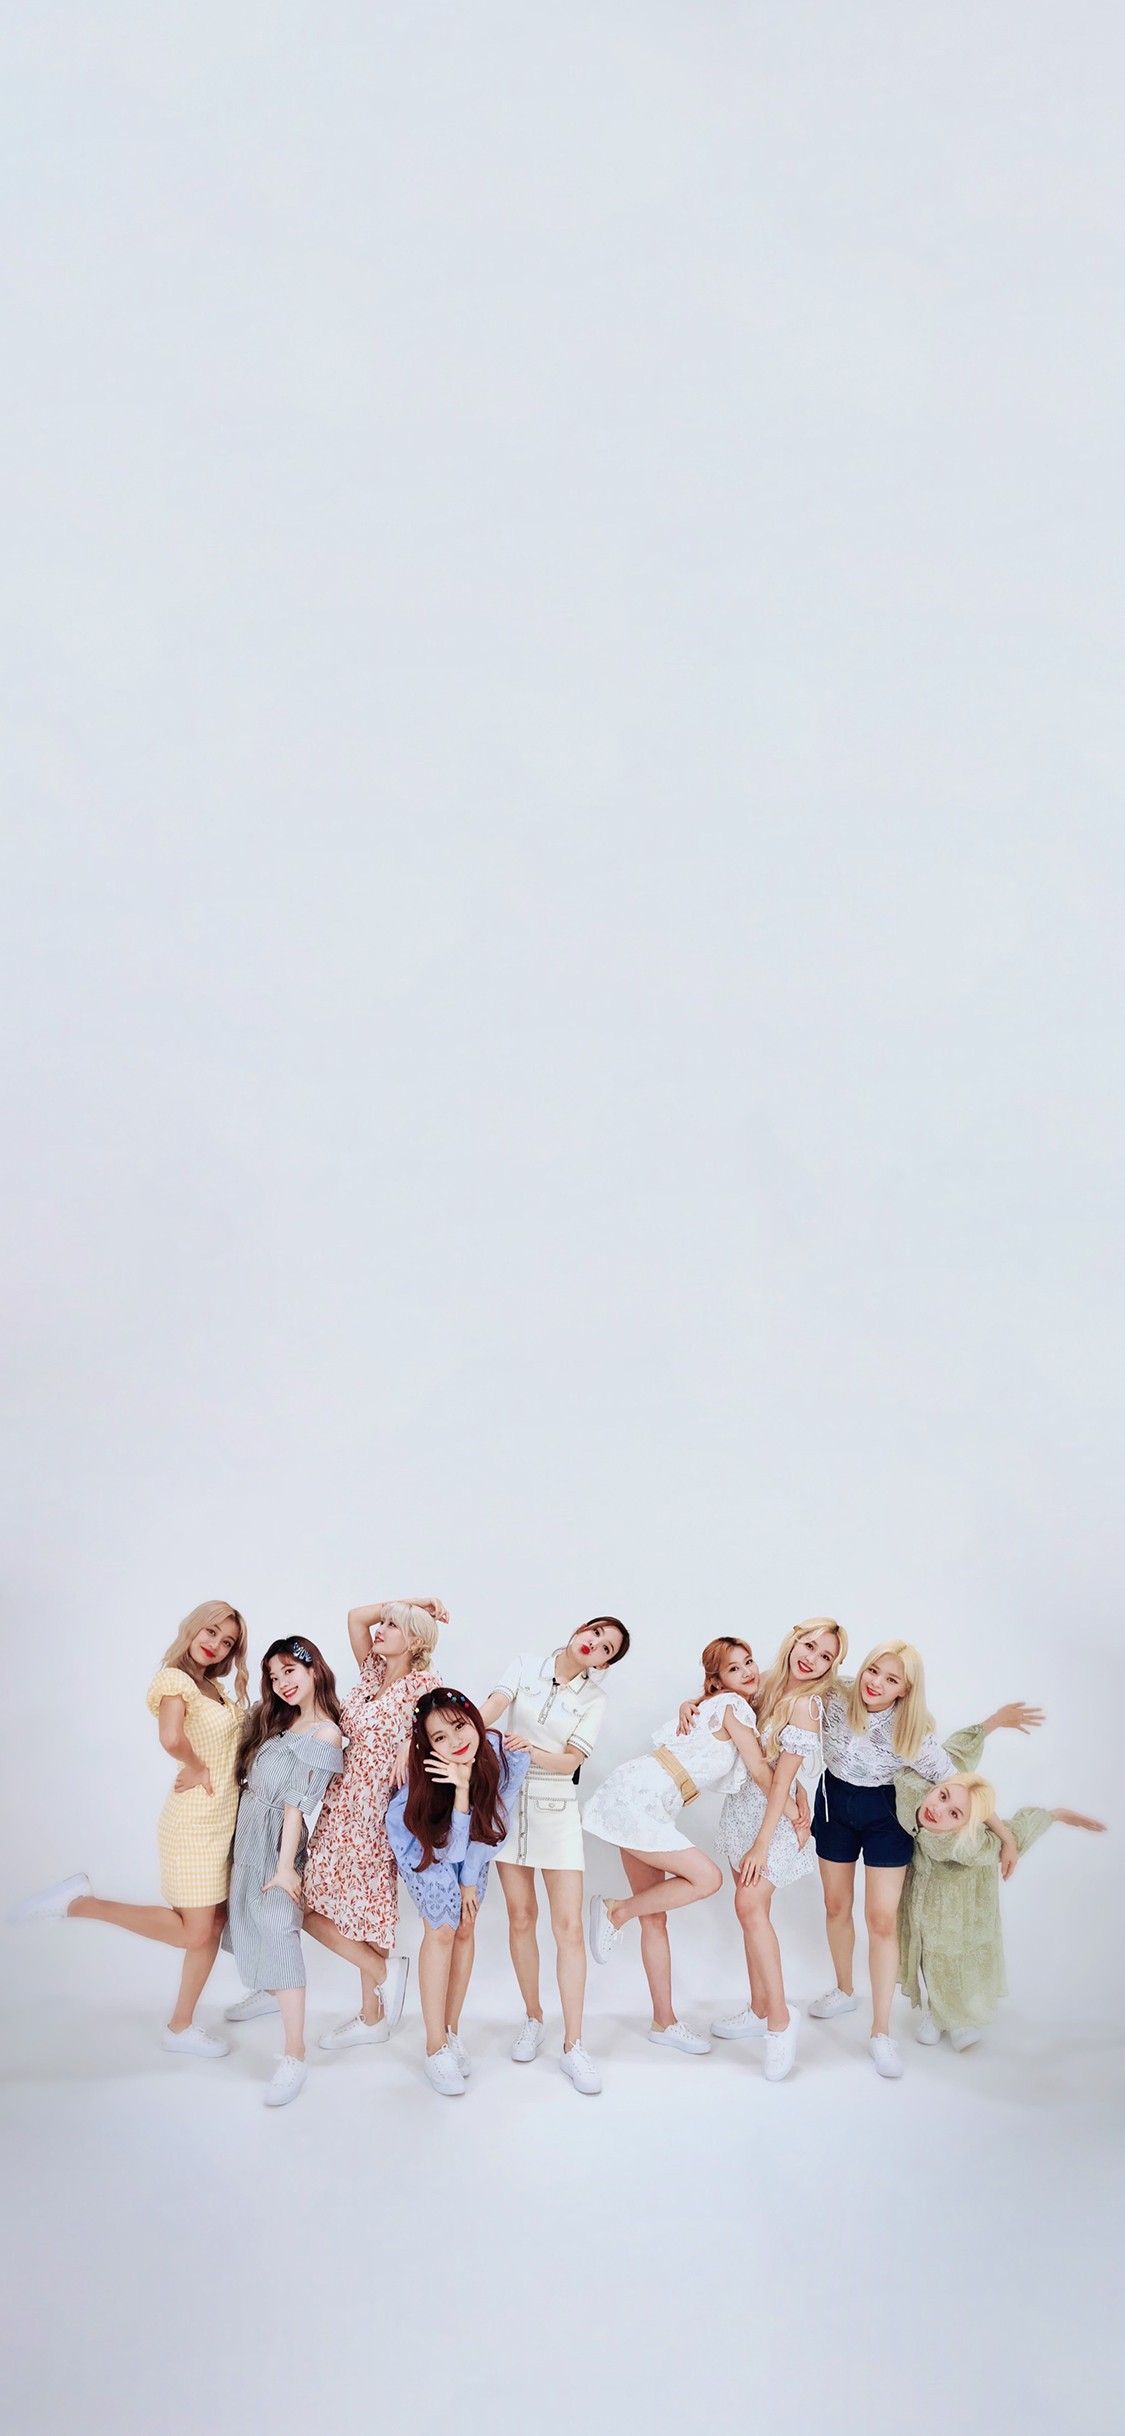 Twice Mobile Wallpapers  Wallpaper Cave